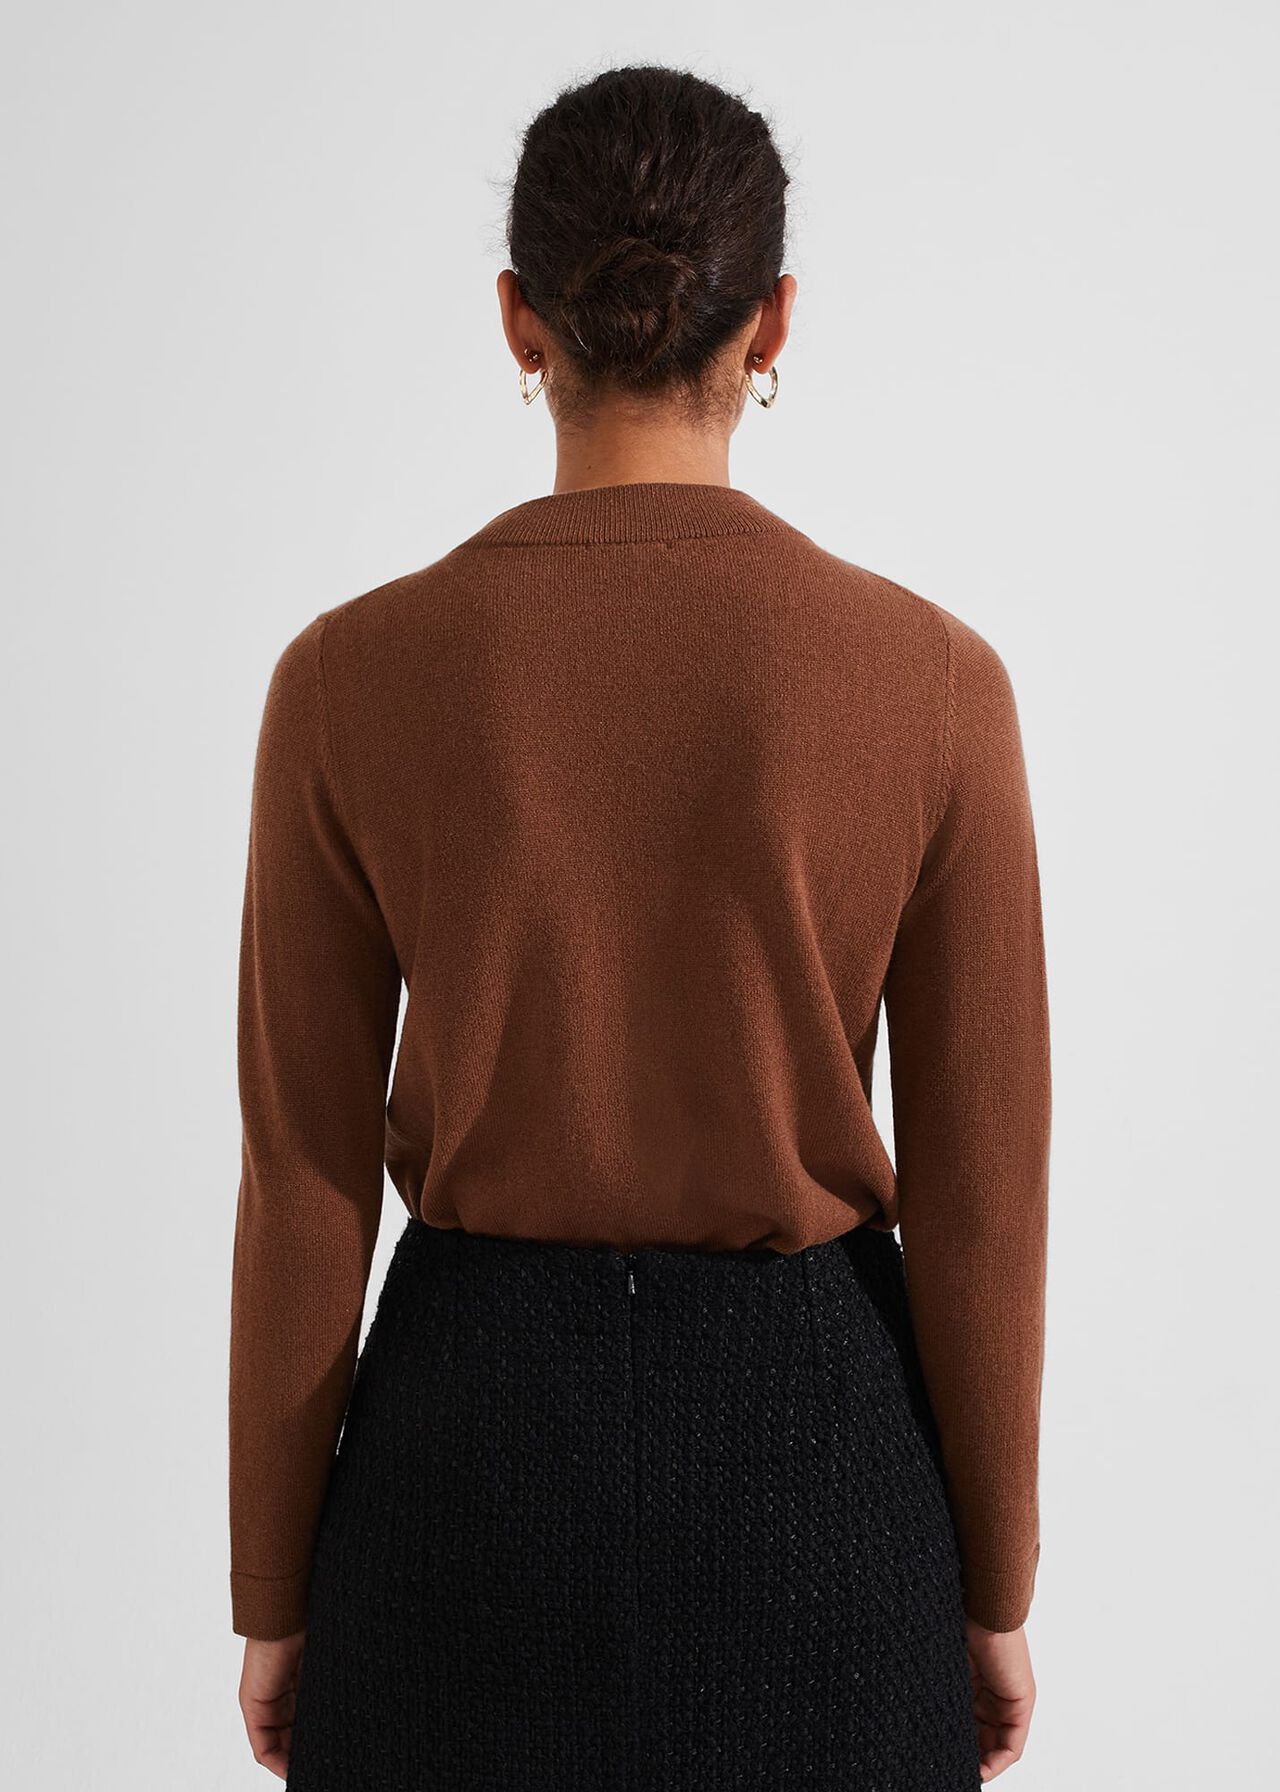 Talia Wool Cashmere Sweater, Toffee, hi-res